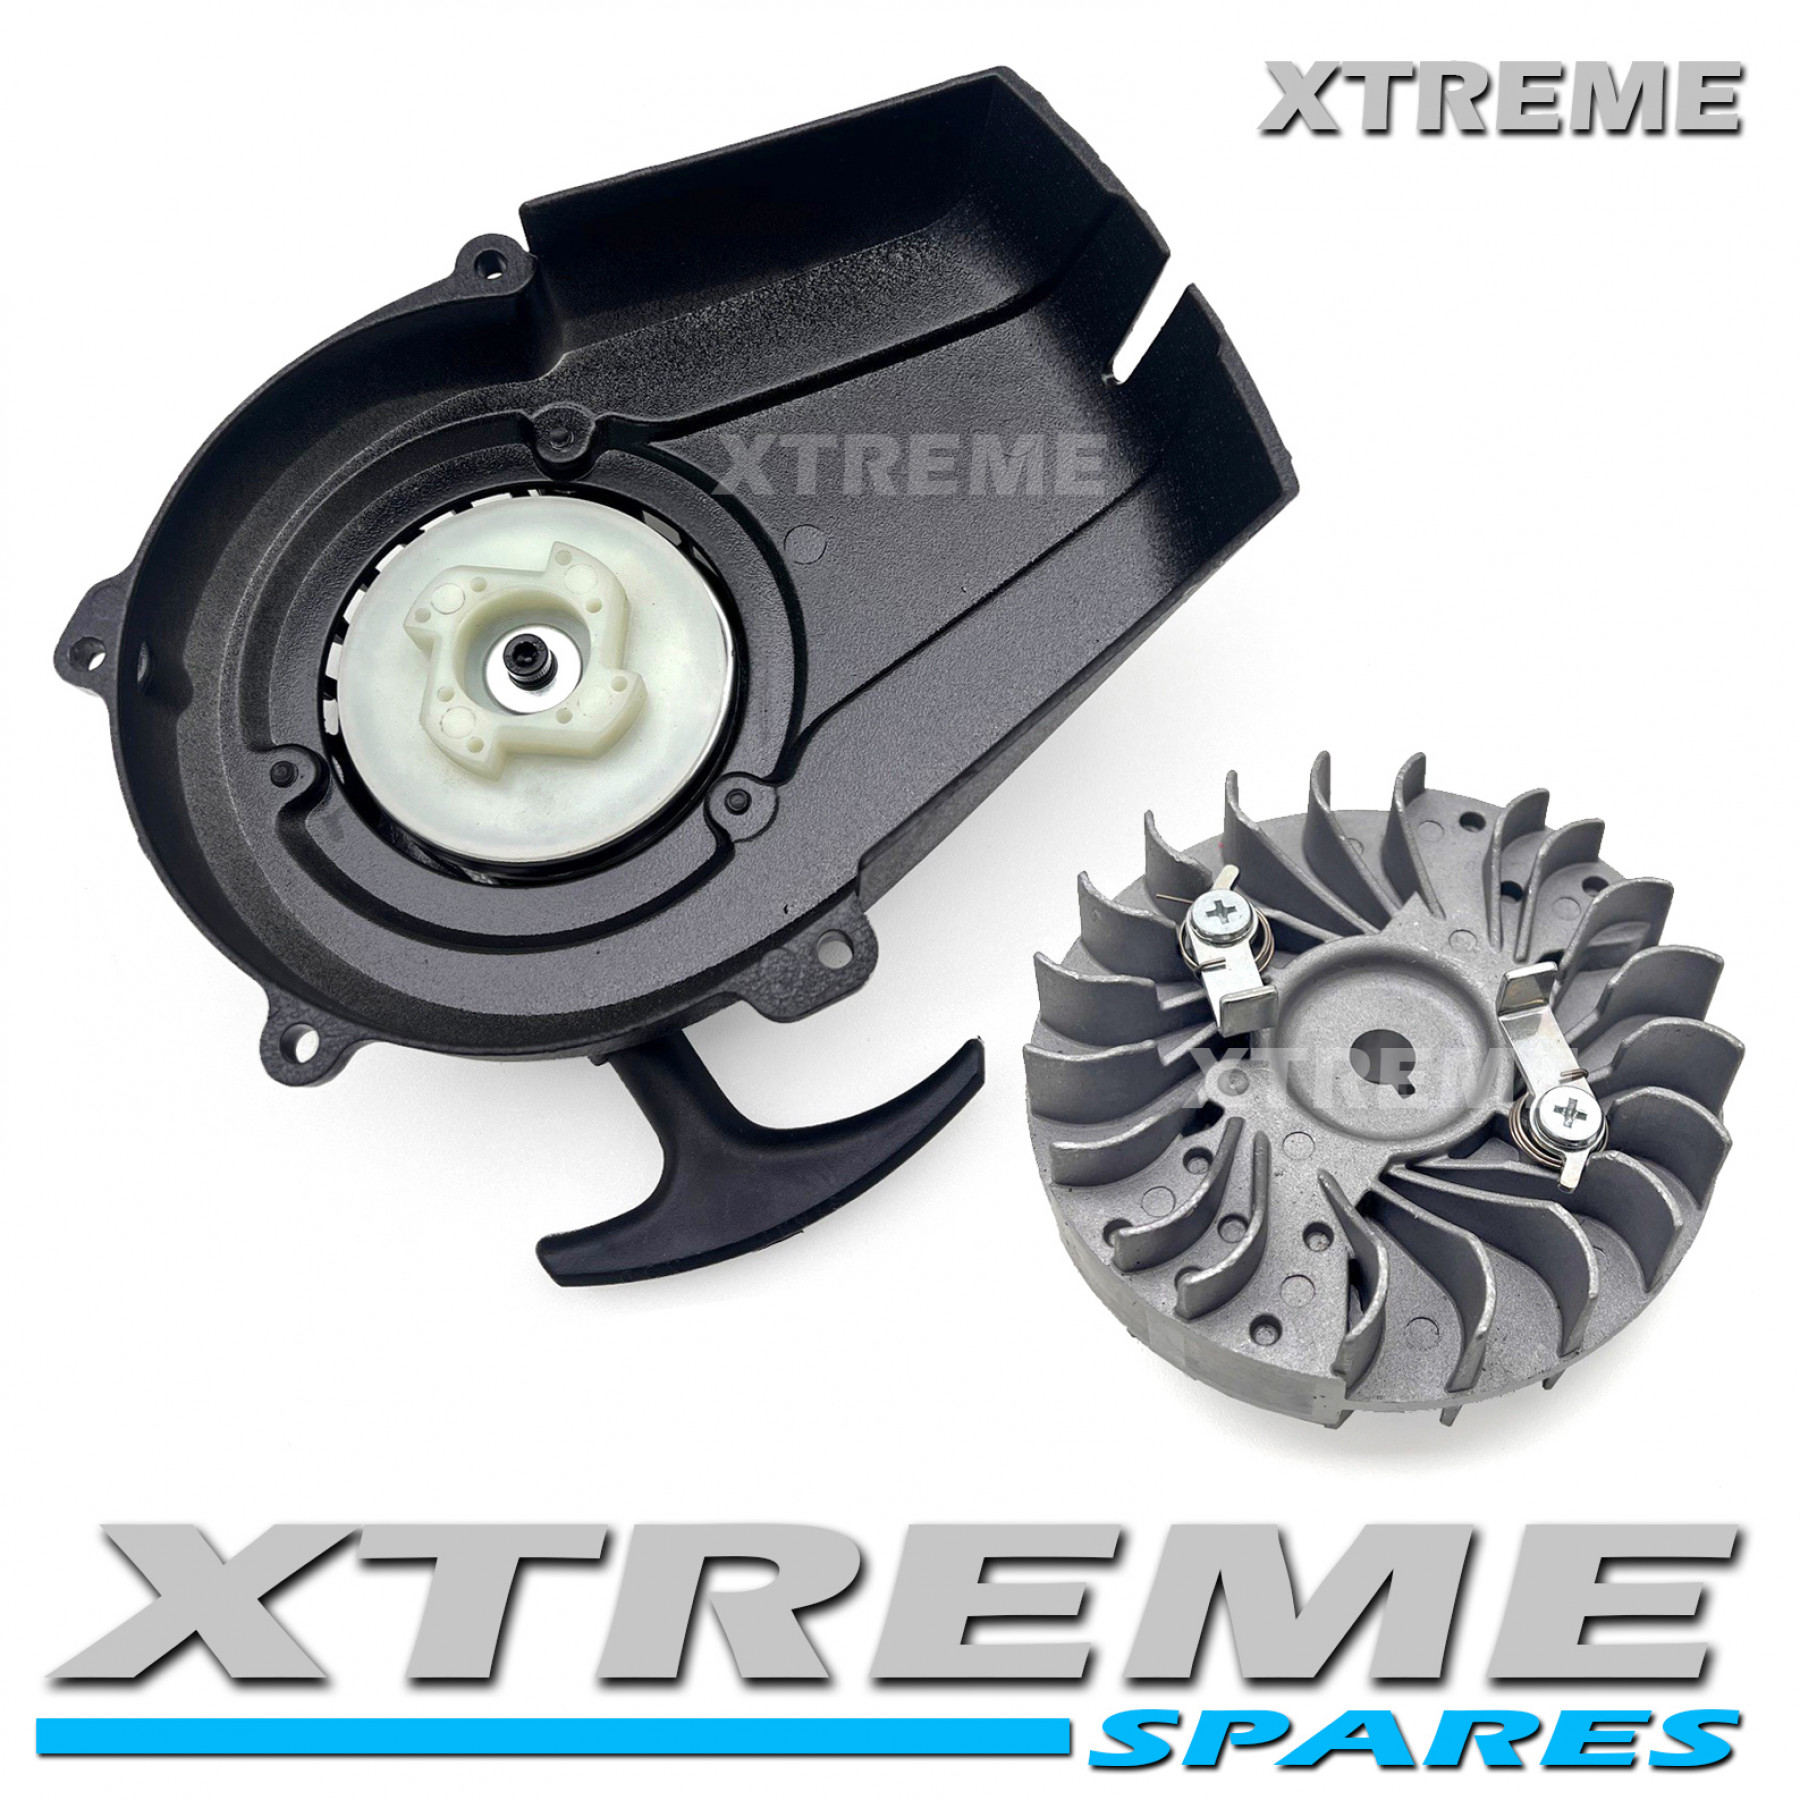 XTM MX60 60CC PETROL DIRT BIKE REPLACEMENT EASY PULL START WITH FLYWHEEL